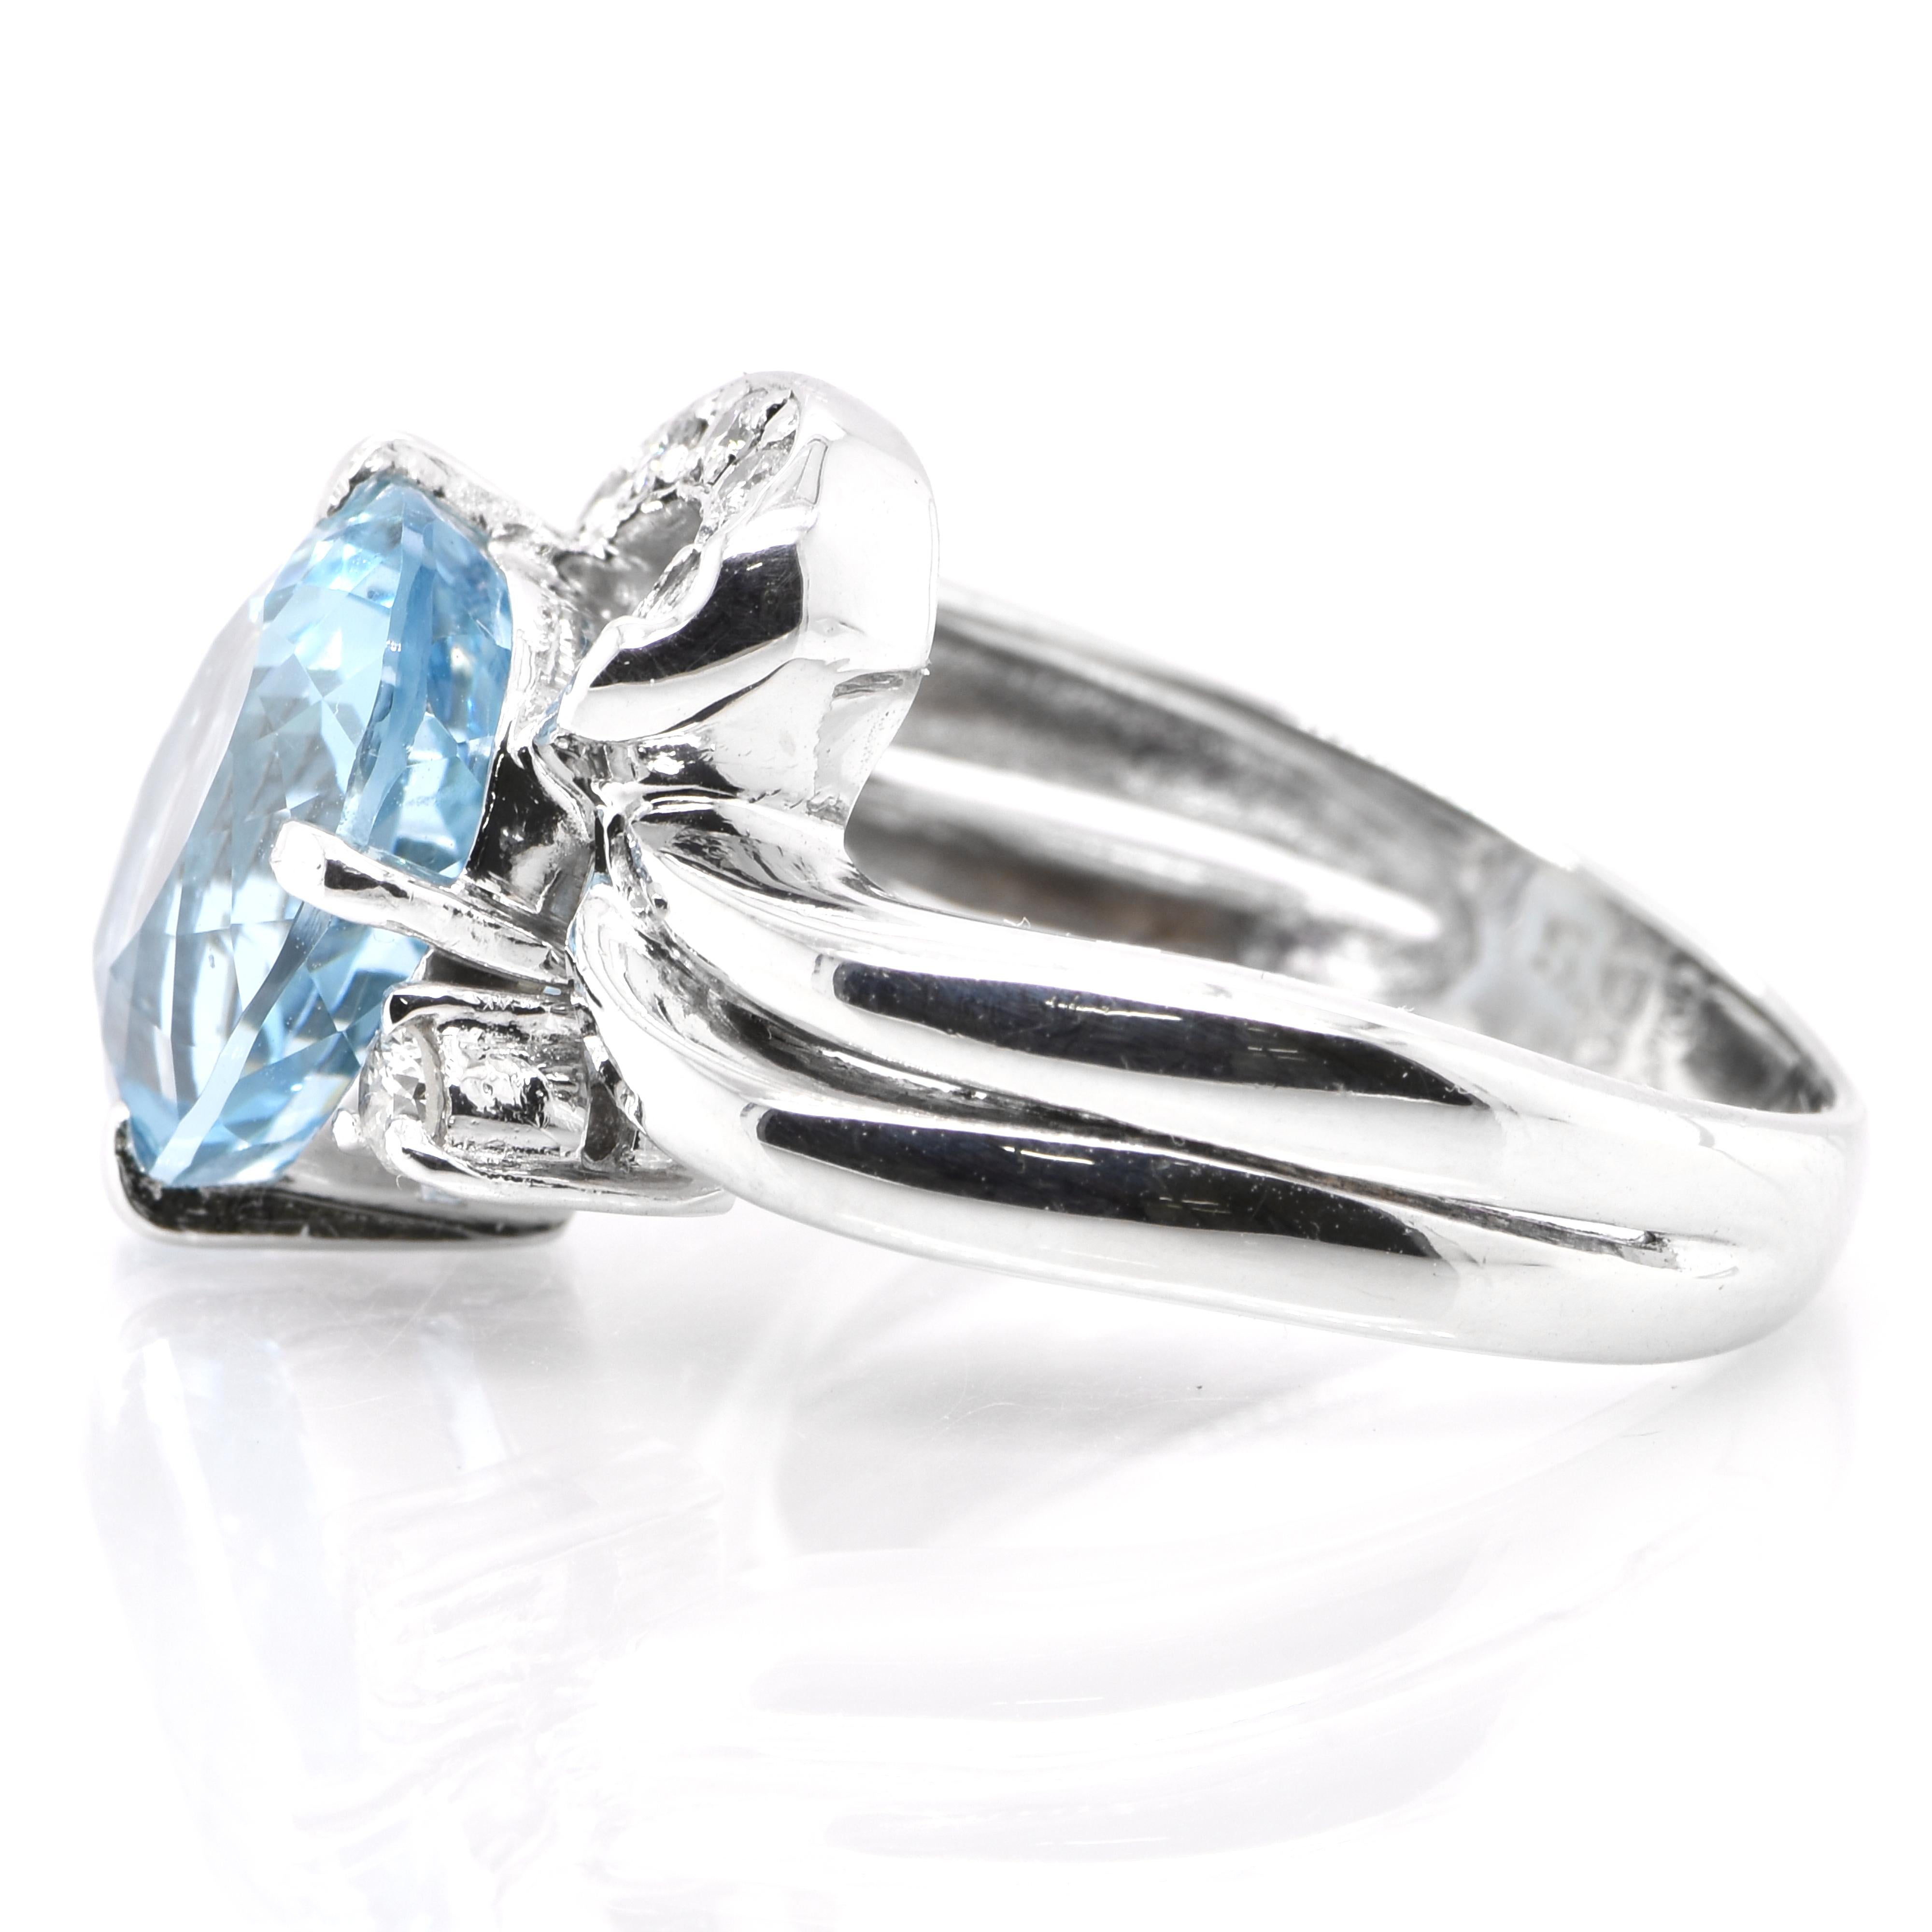 Oval Cut 5.03 Carat Natural Aquamarine and Diamond Cocktail Ring Set in Platinum For Sale